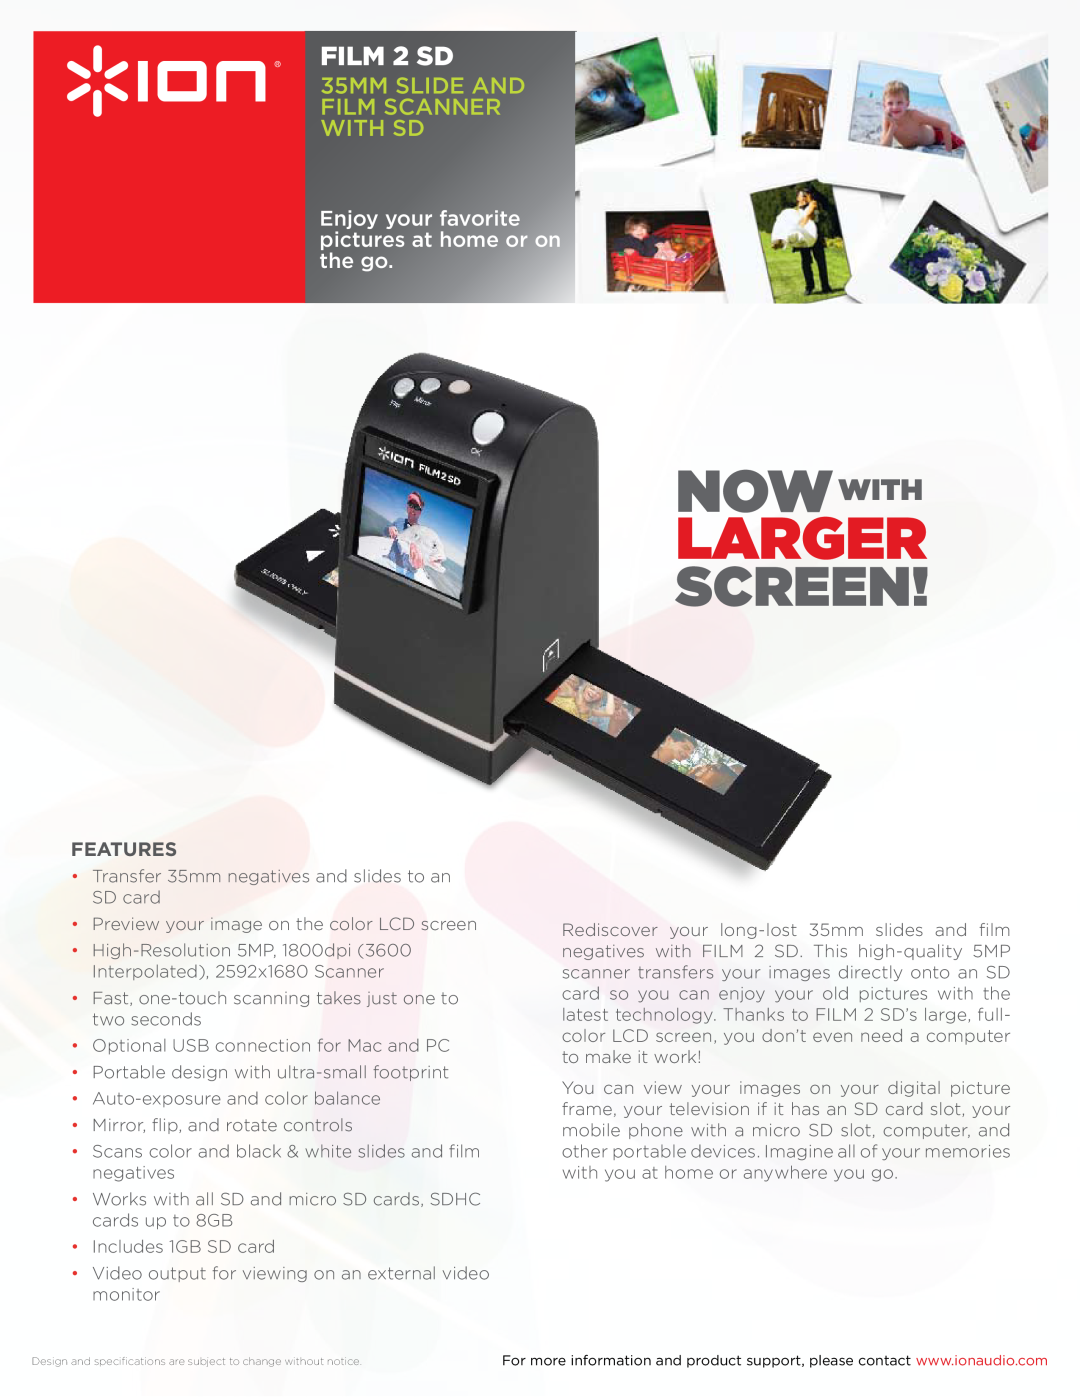 ION FILM2SD specifications Larger, Screen, Nowwith, FILM 2 SD, 35MM SLIDE AND FILM SCANNER WITH SD, Features 